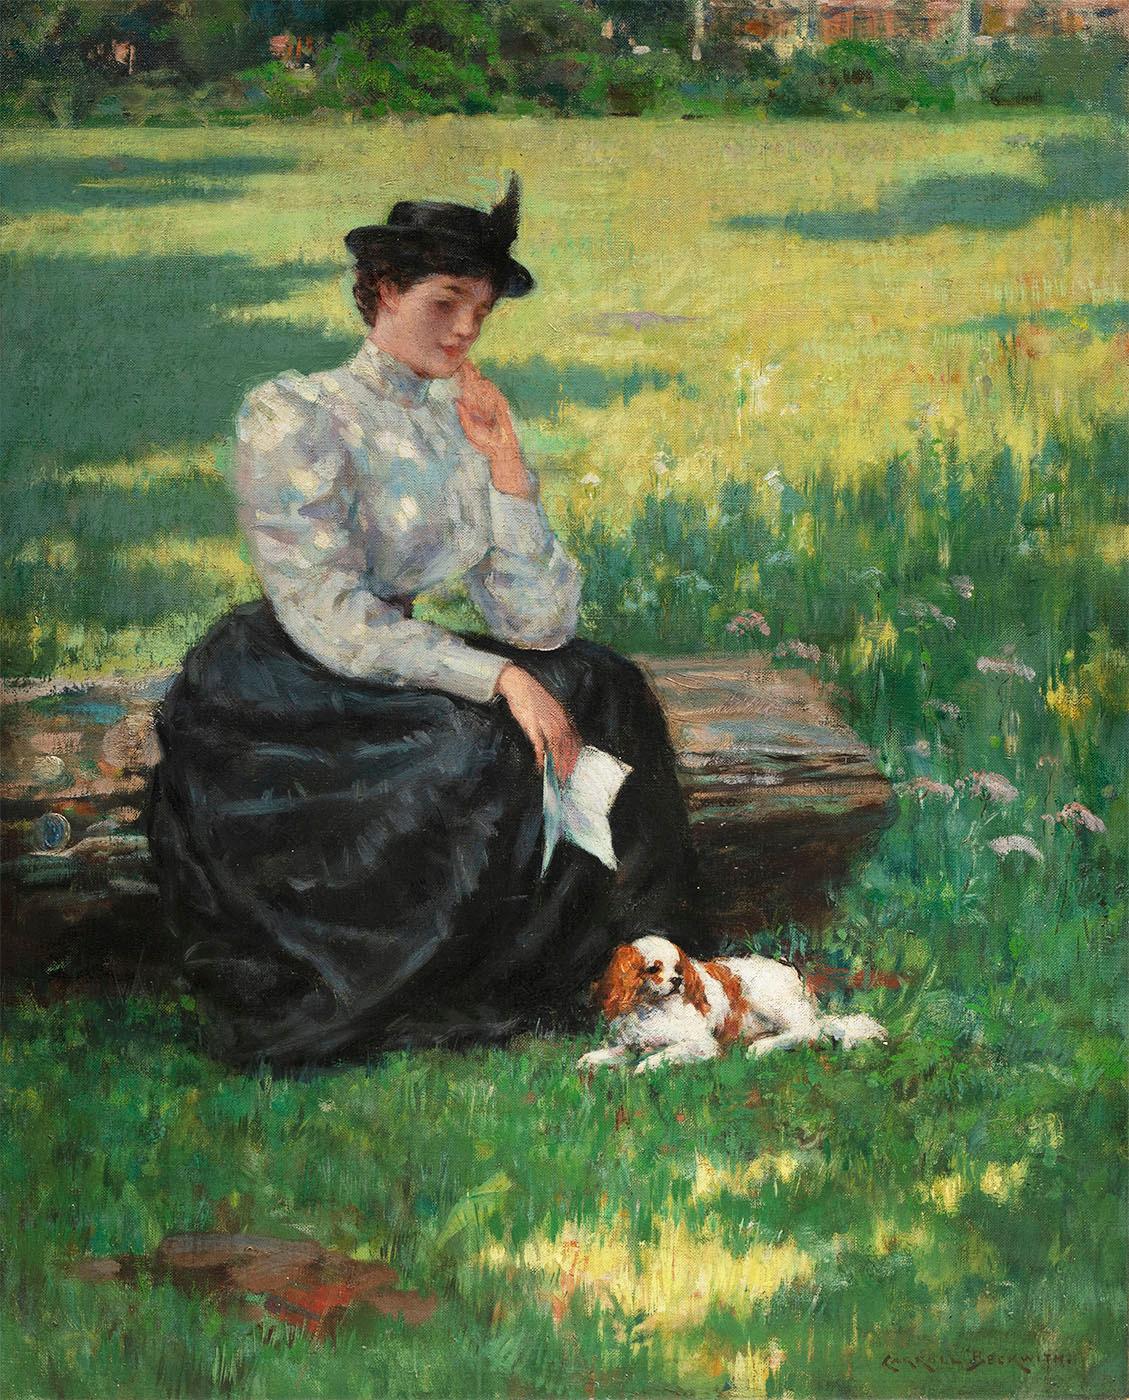 Figurative Painting James Carroll Beckwith - La lettre